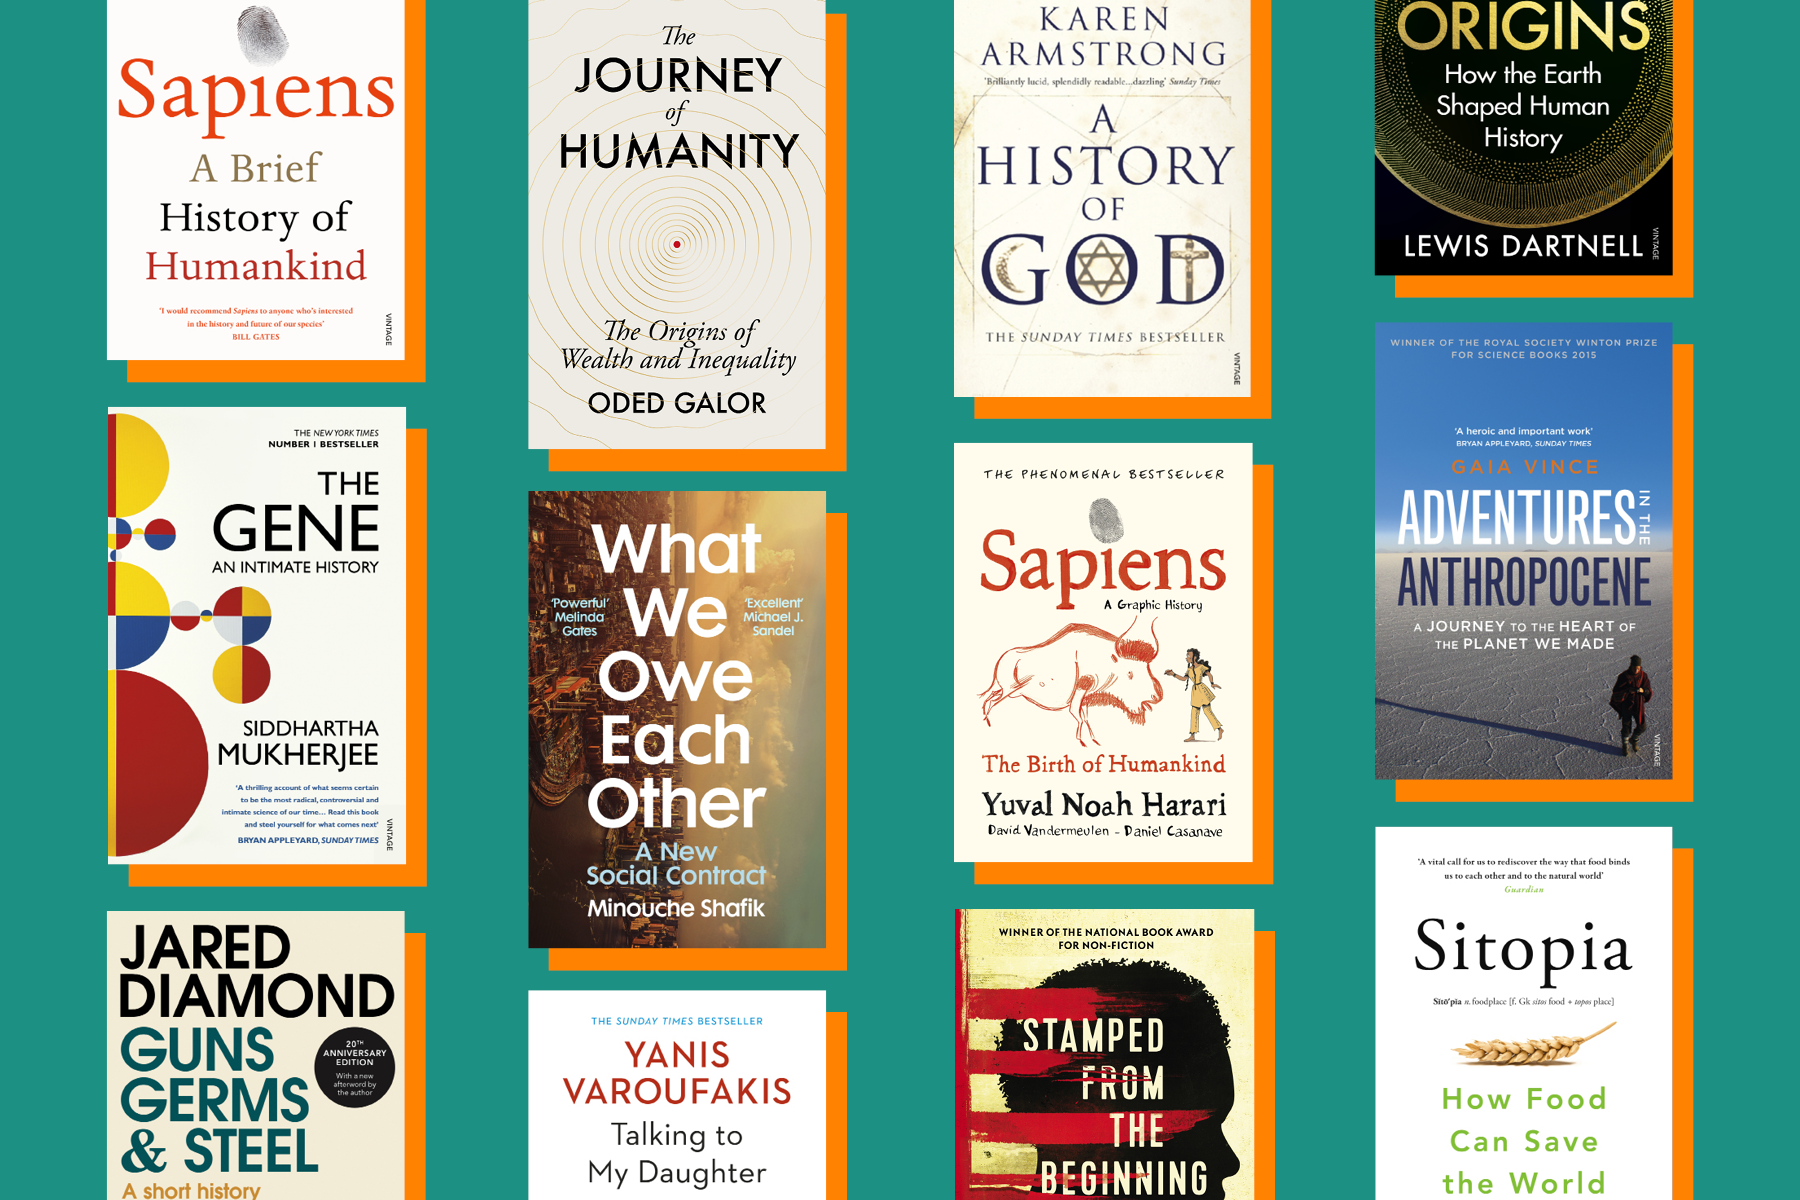 Tiled graphic of book jackets against a green background, including Sapiens and The Journey of Humanity